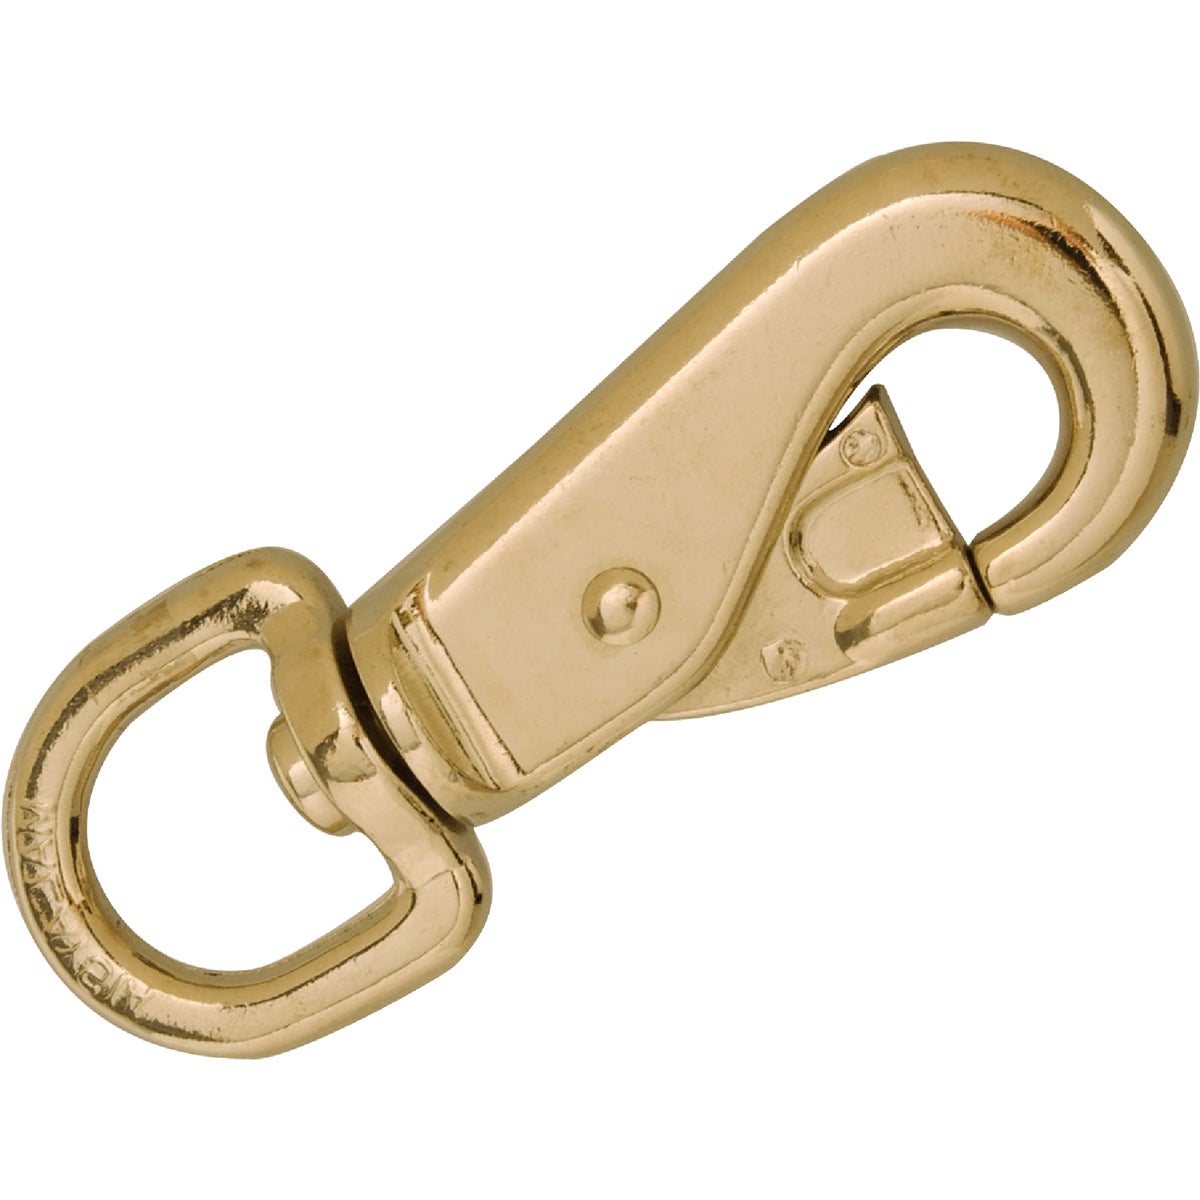 Item 743299, Cadmium-plated cast malleable iron swivel eye security snap.